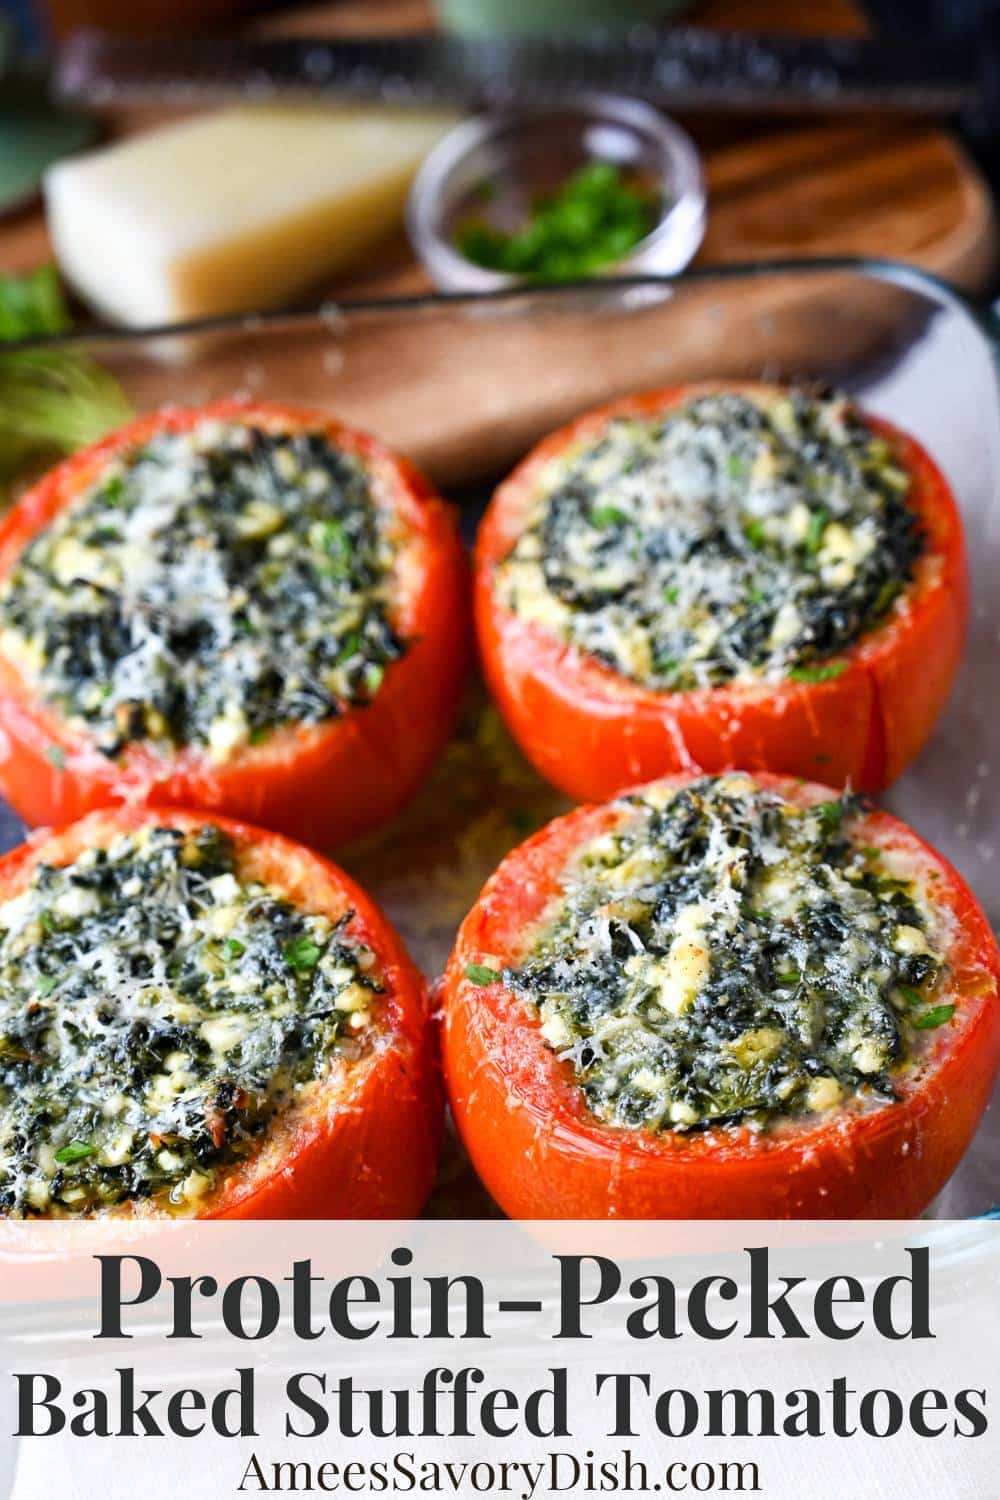 This Italian-inspired dish makes an excellent appetizer, side dish, or high-protein meatless main course, packing an impressive 20 grams of protein per tomato!  via @Ameessavorydish